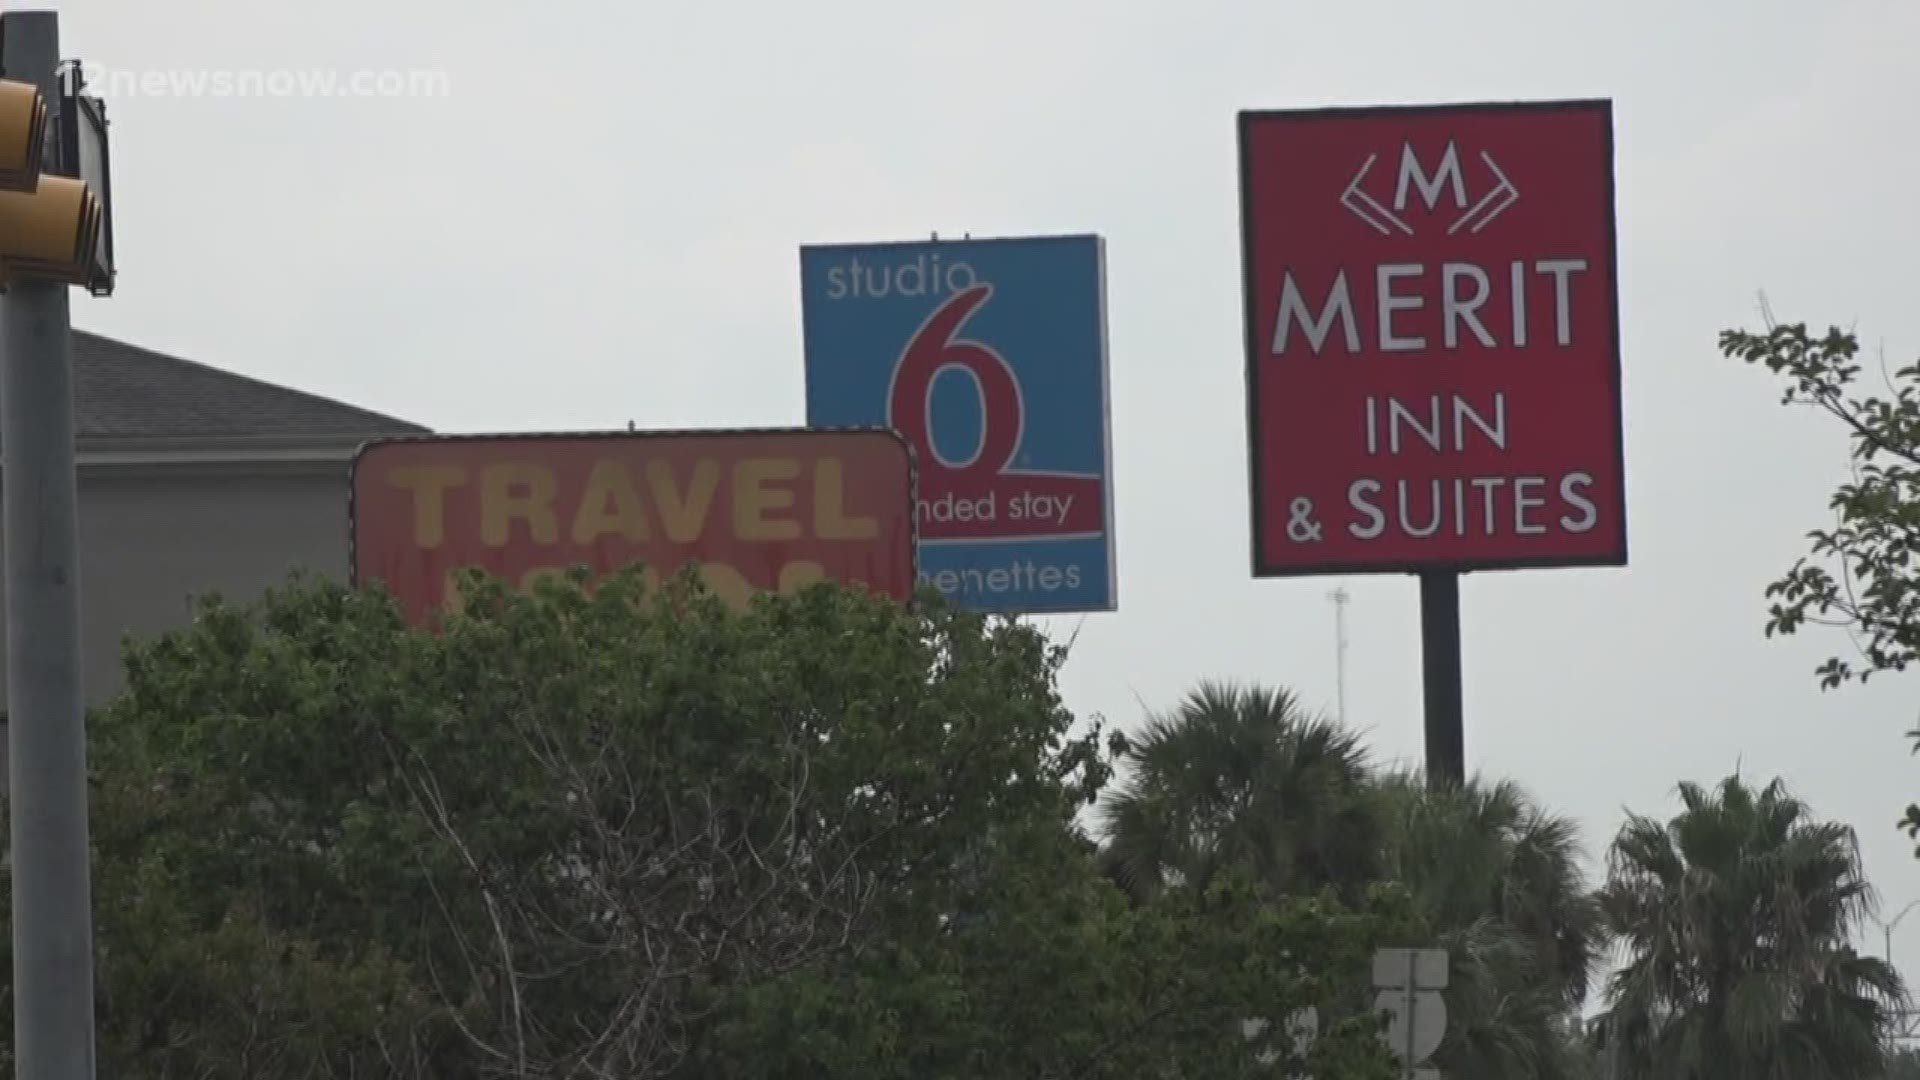 Bryant tells 12News that the Days Inn, located on 11th Street in Beaumont, has more than 60 rooms available this weekend and will be ready to accommodate.